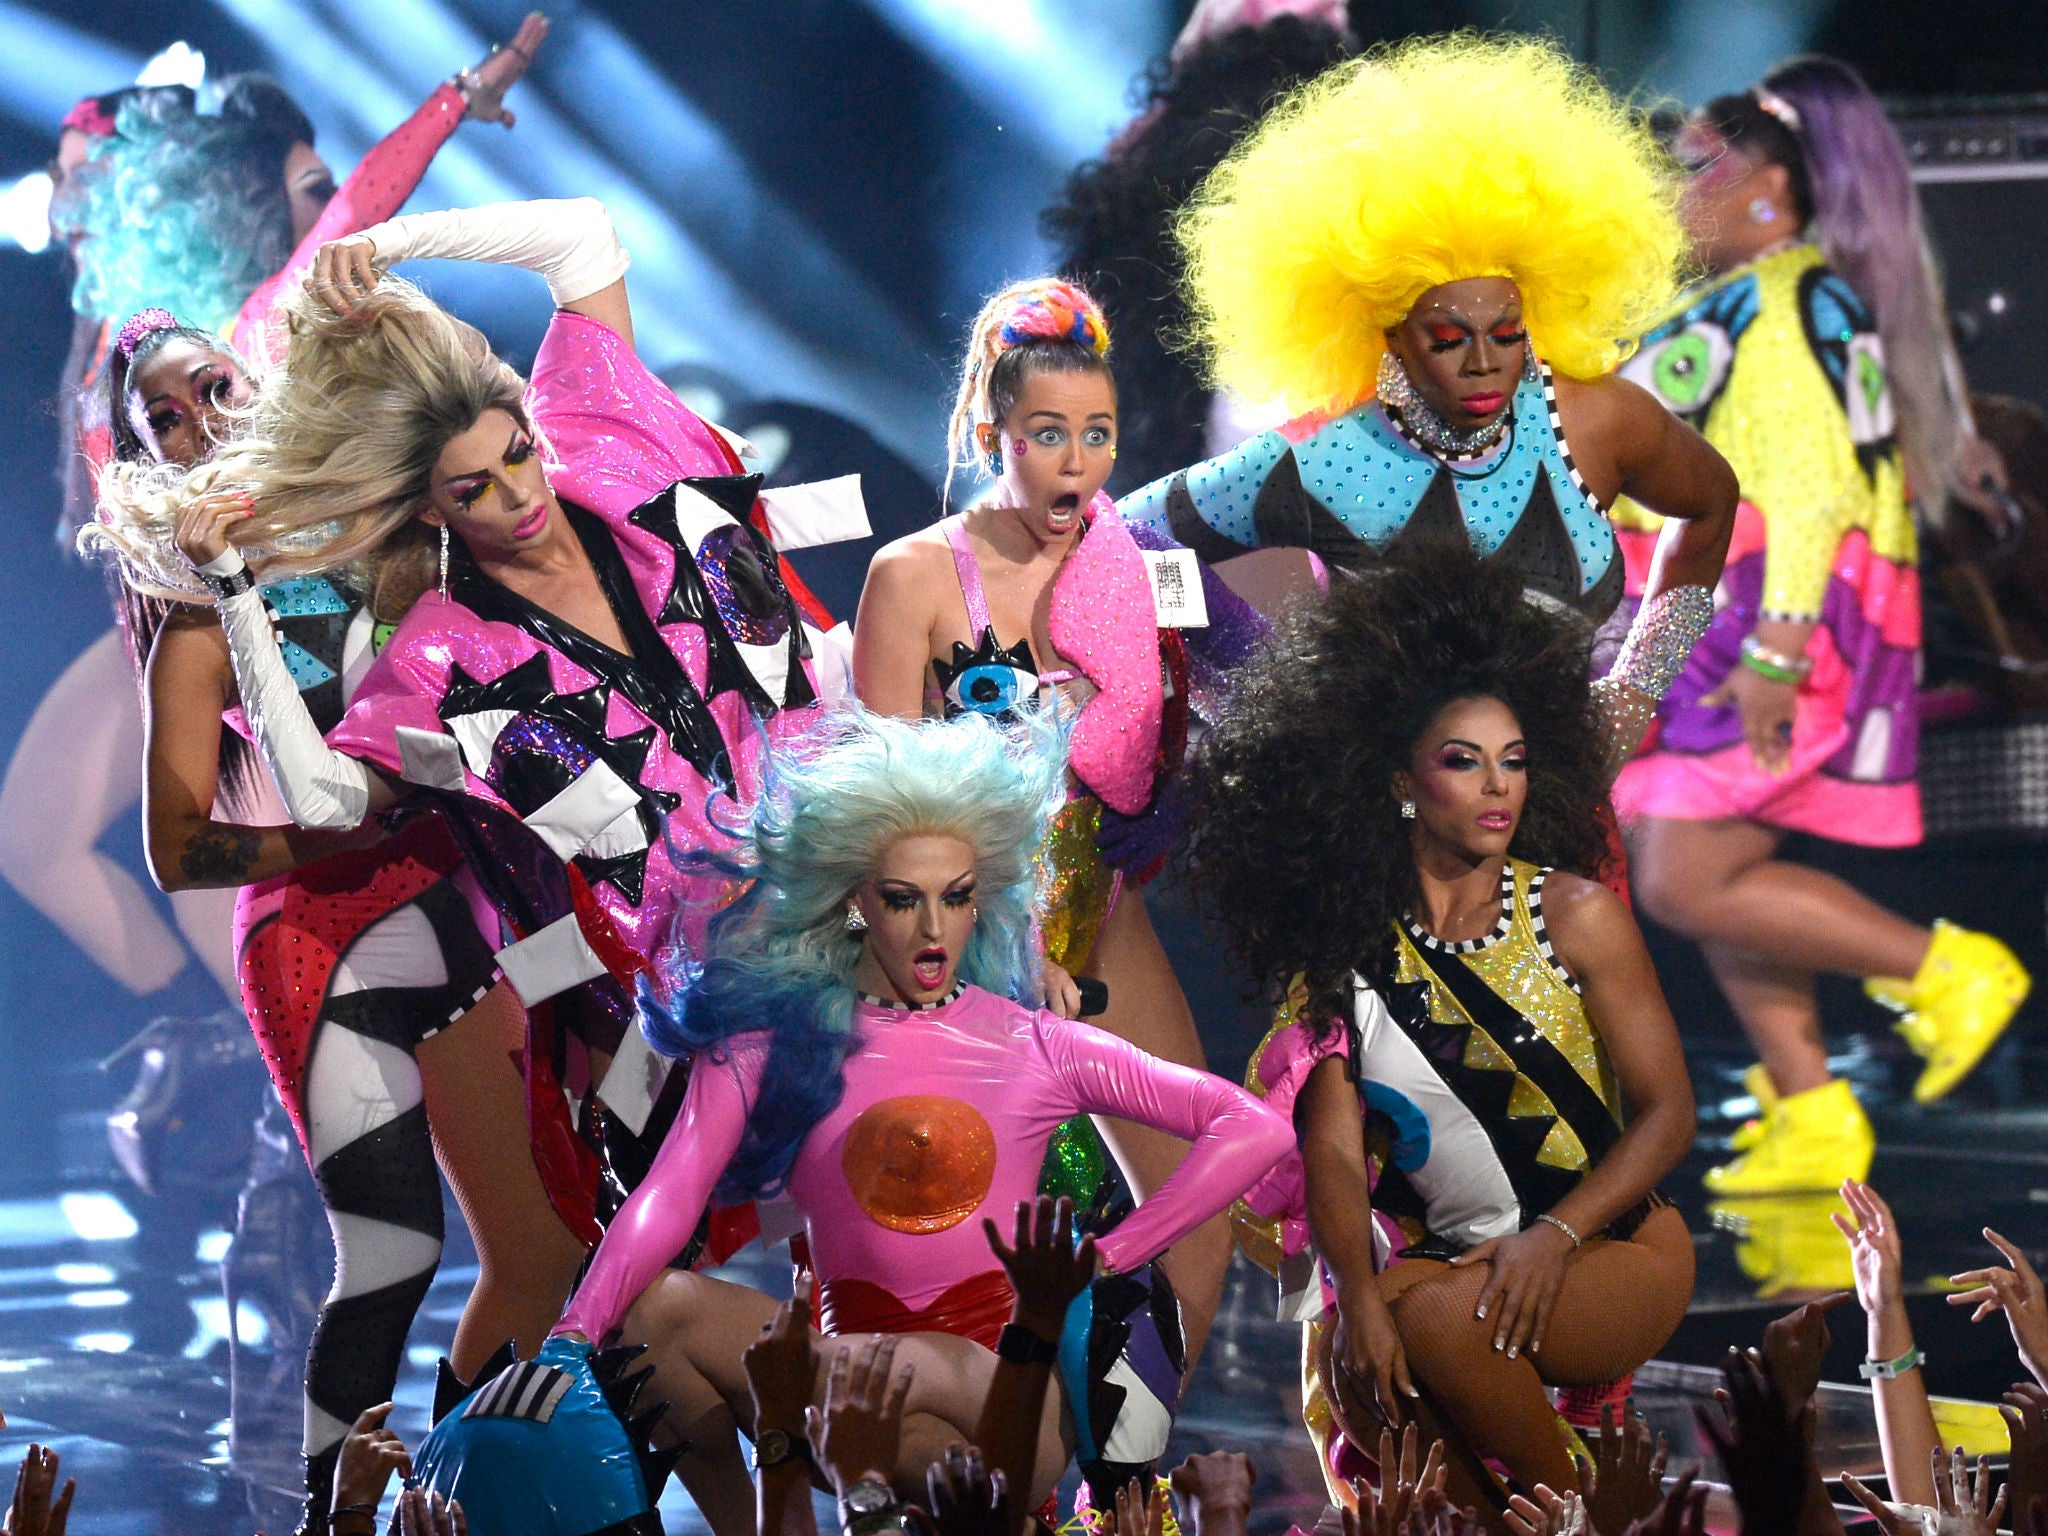 Miley Cyrus closed the MTV VMAs 2015 with the help of some drag queens